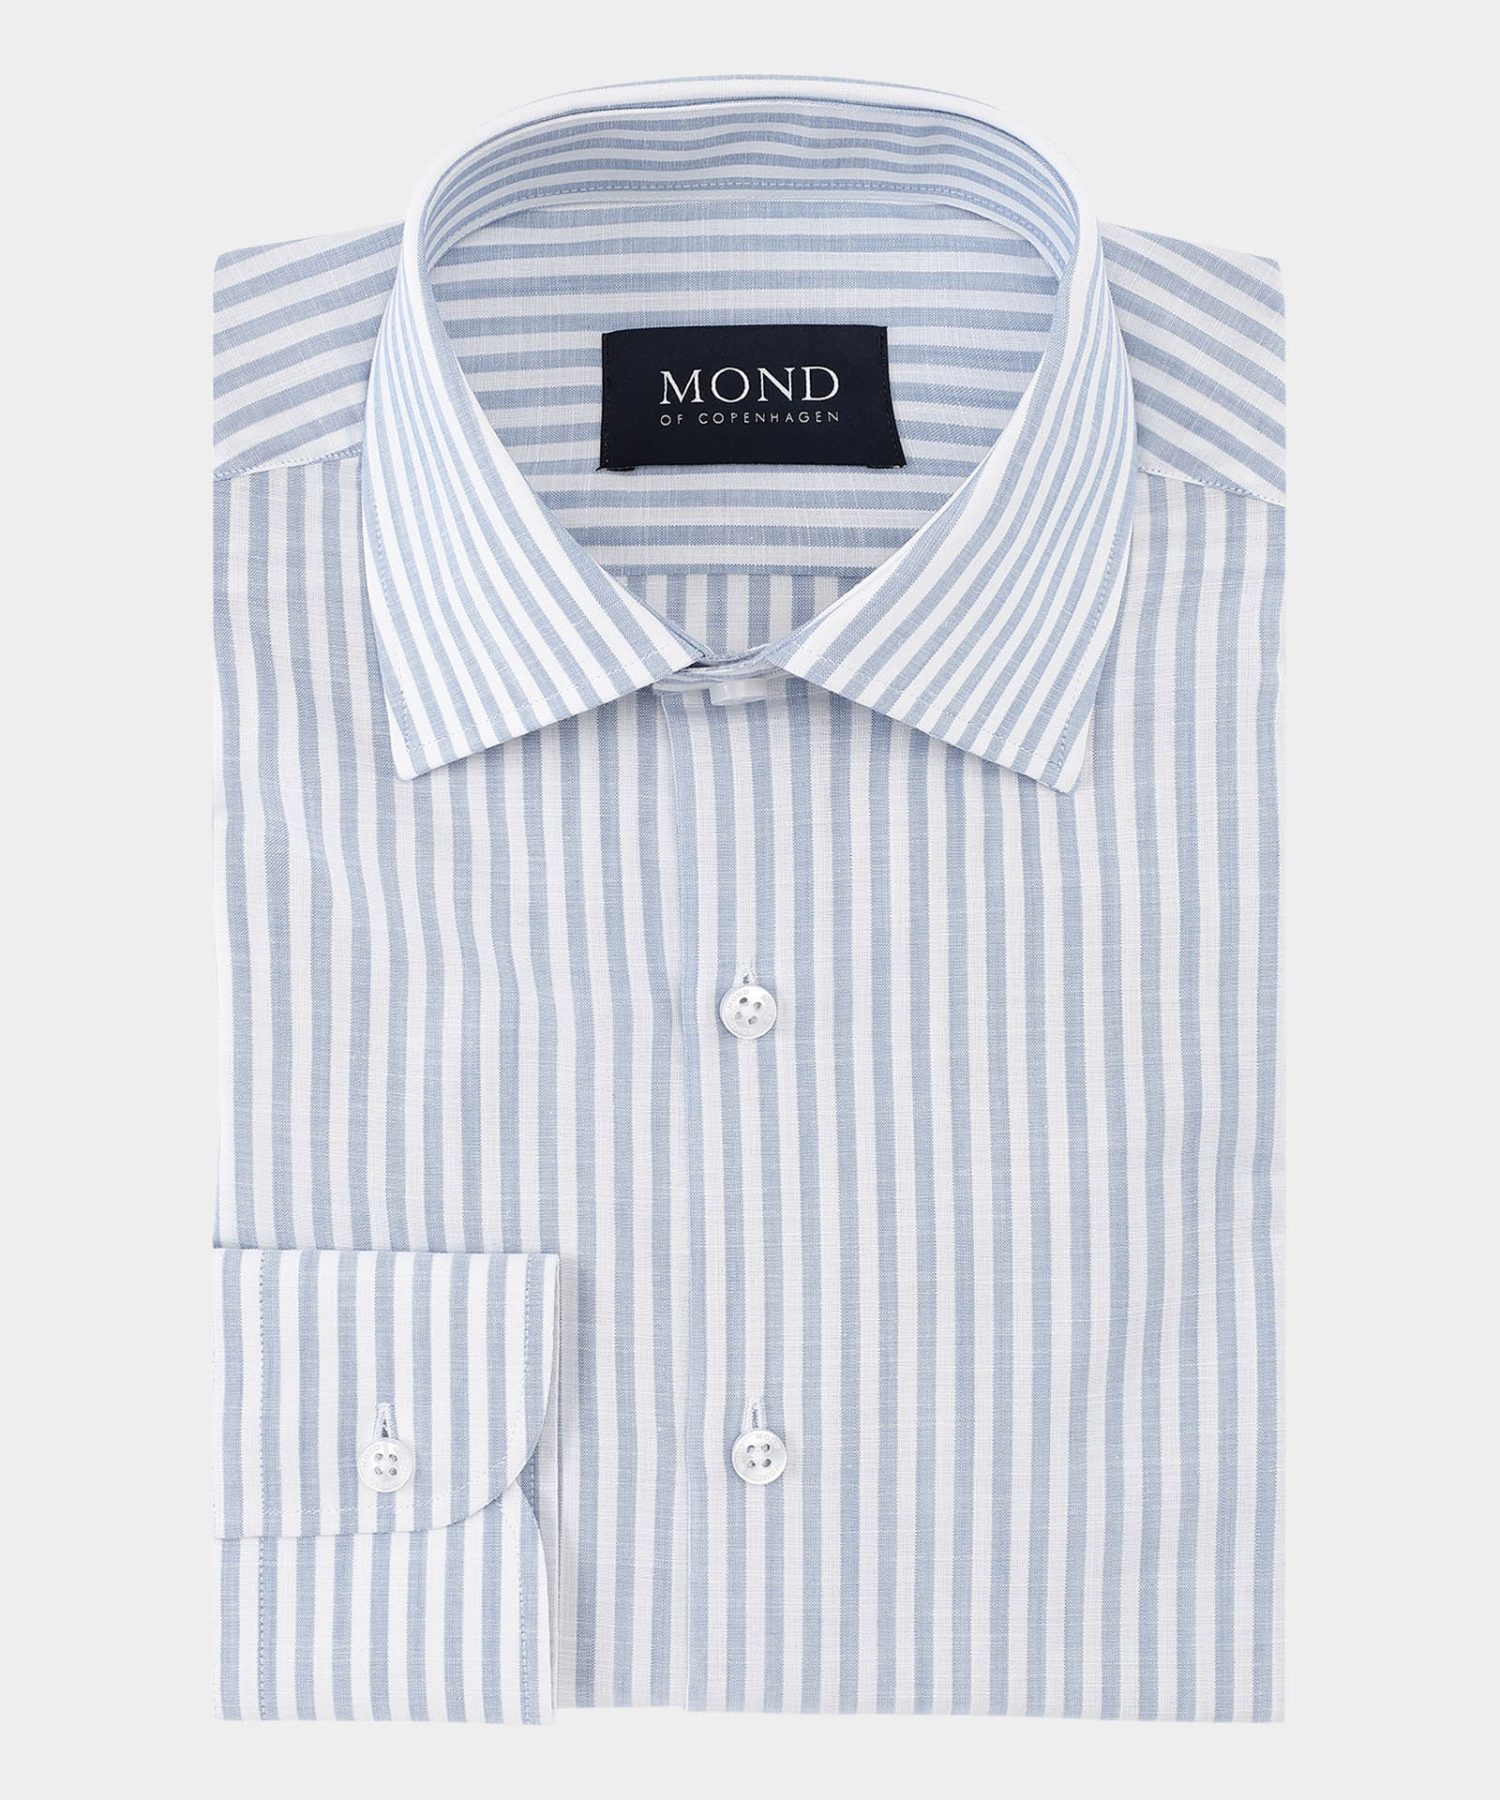 custom tailored striped shirt in white and light slate blue, in twill weave